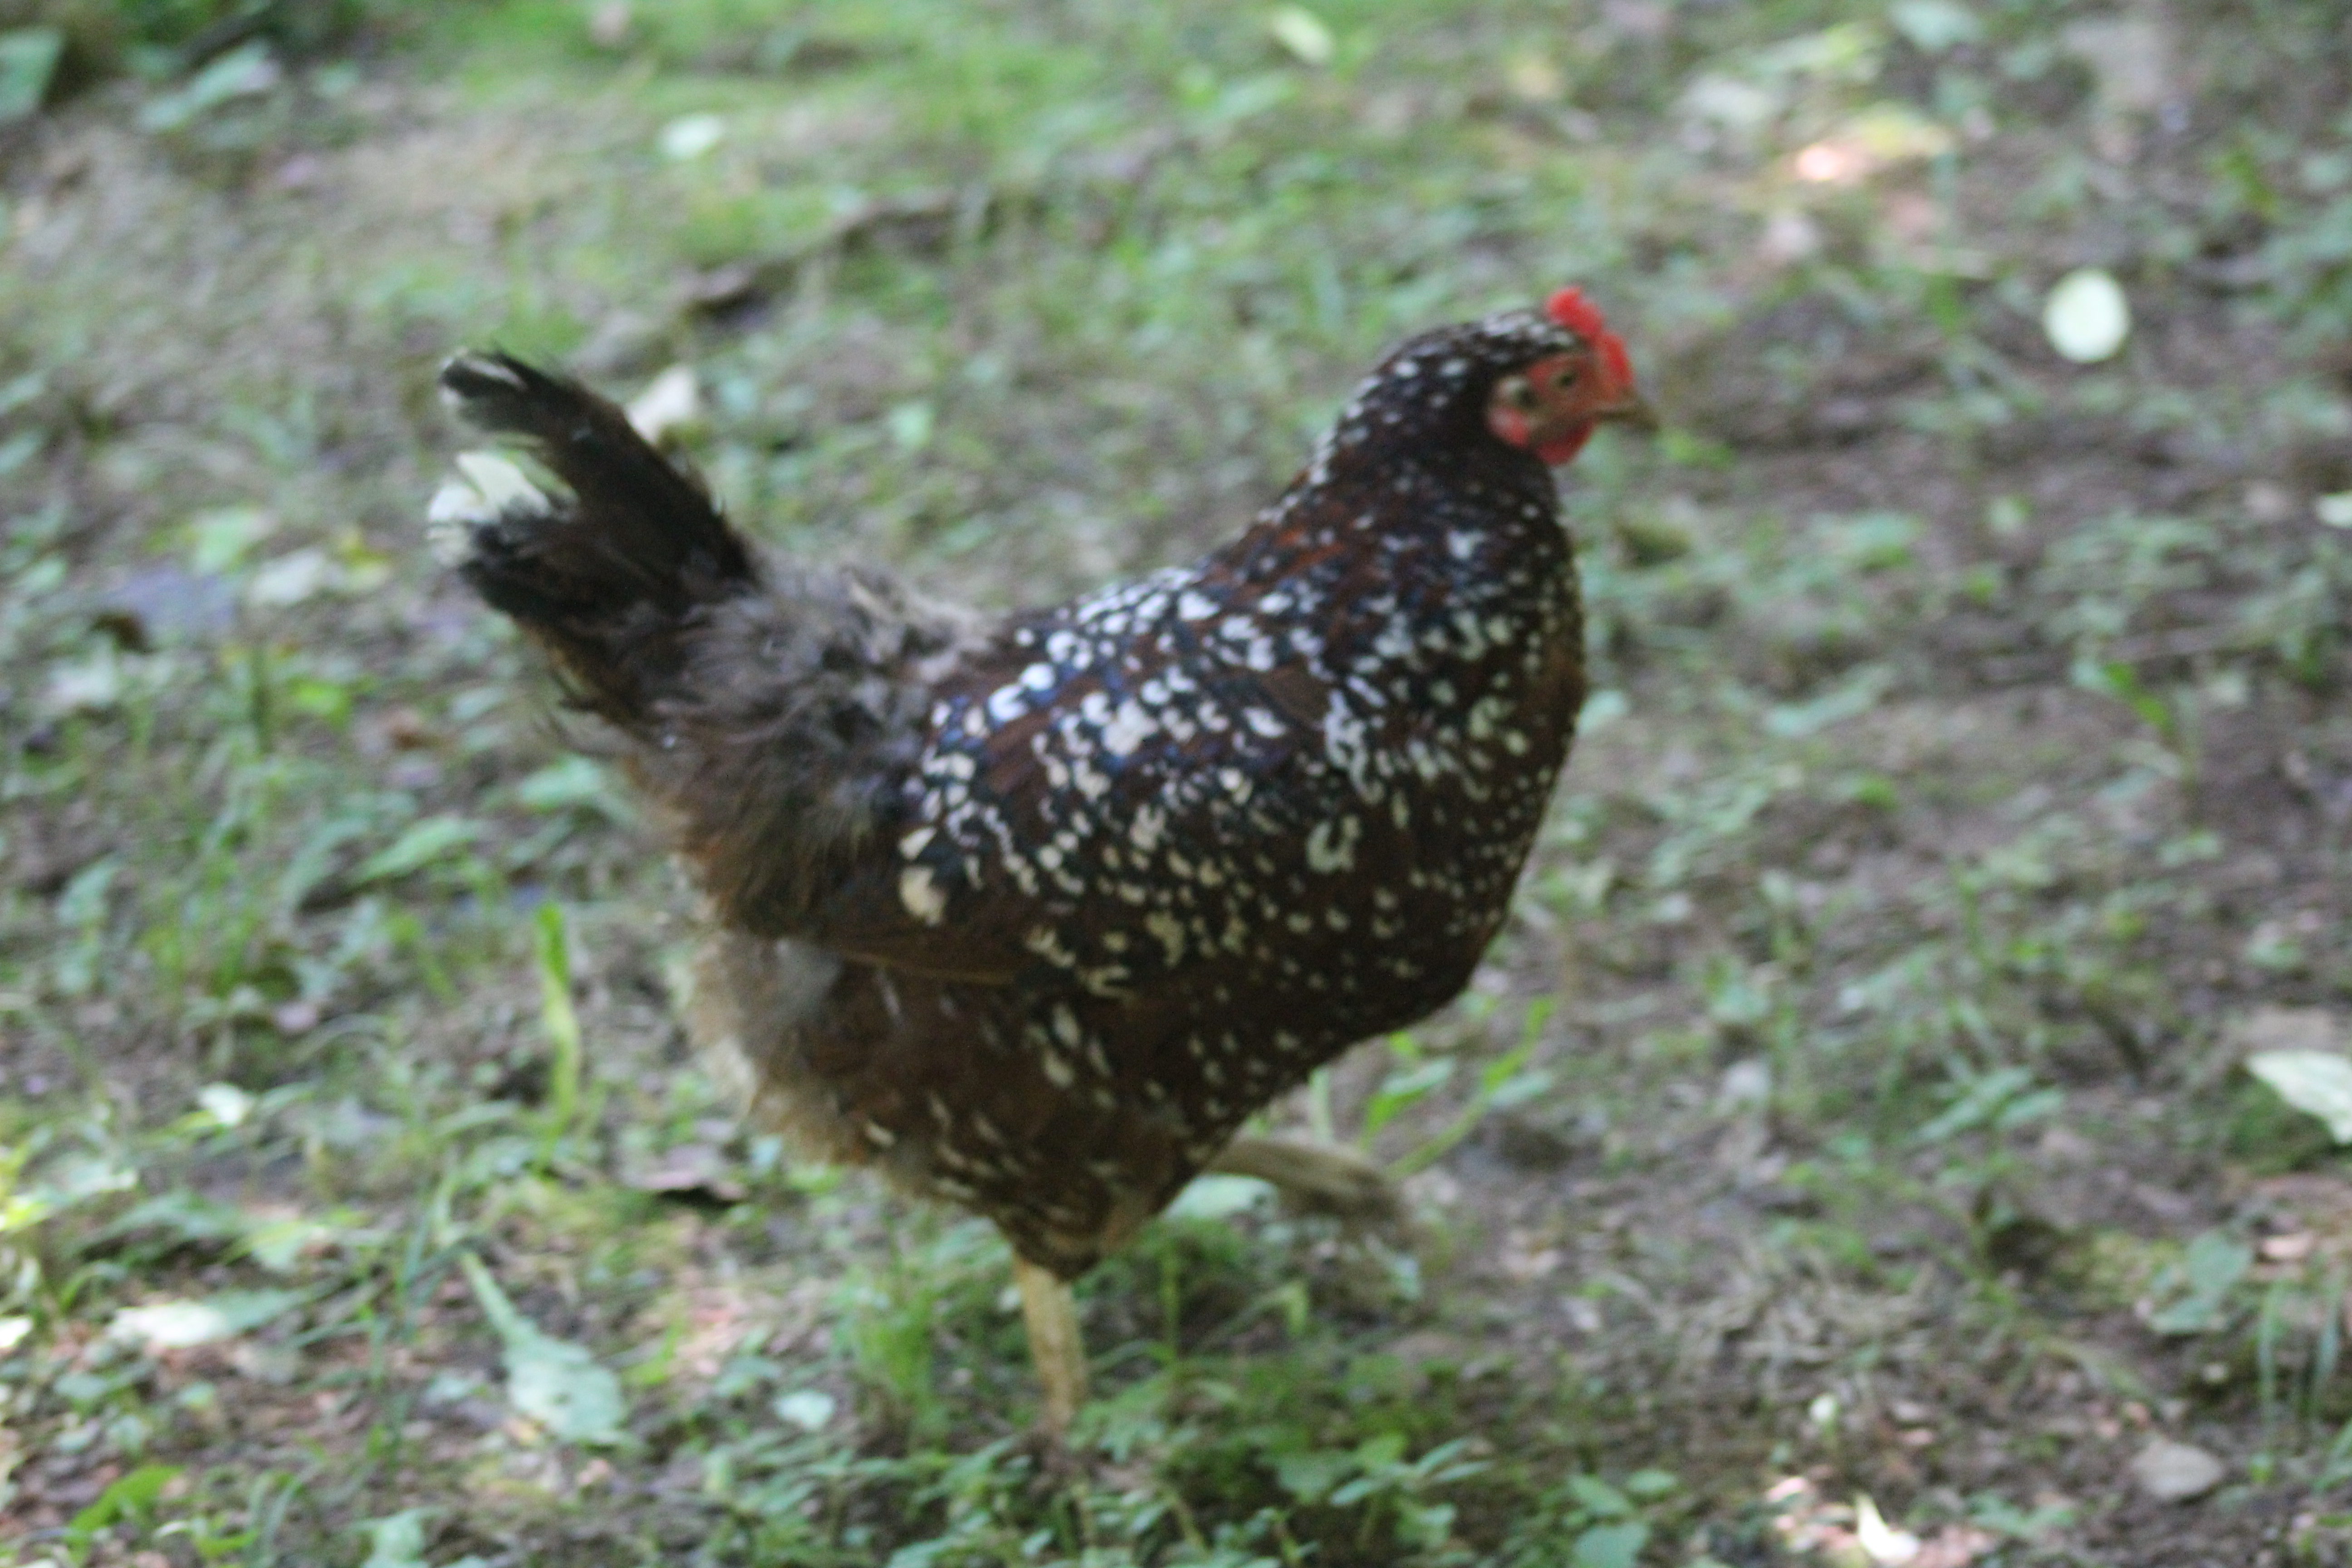 Forrest, my Speckled Sussex hen.